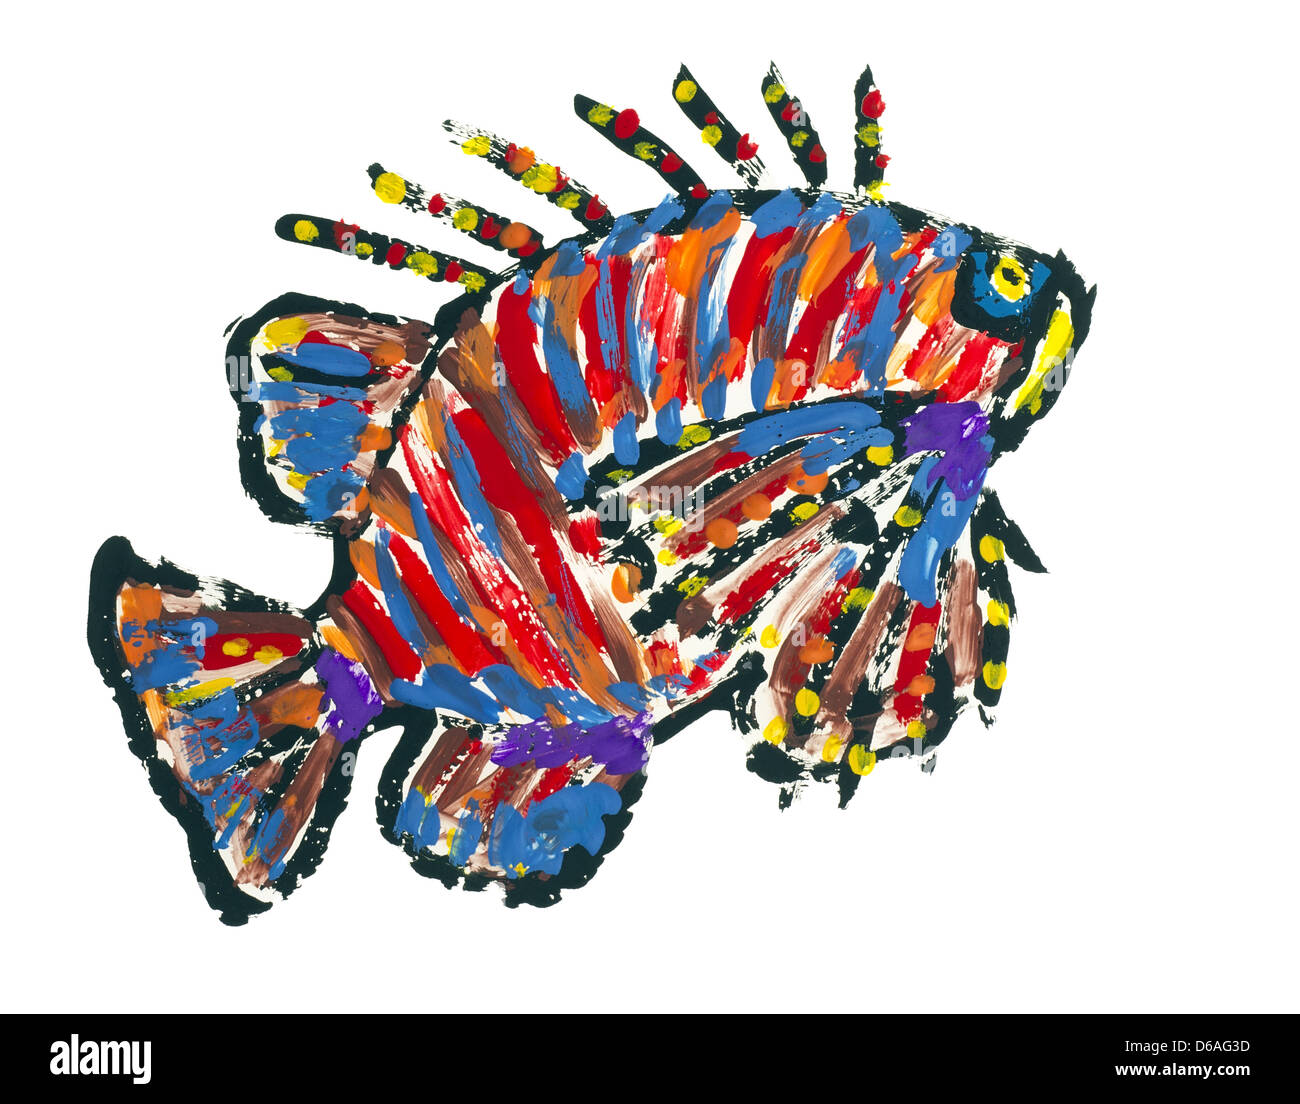 Lionfish Scoprionfish abstract image Stock Photo